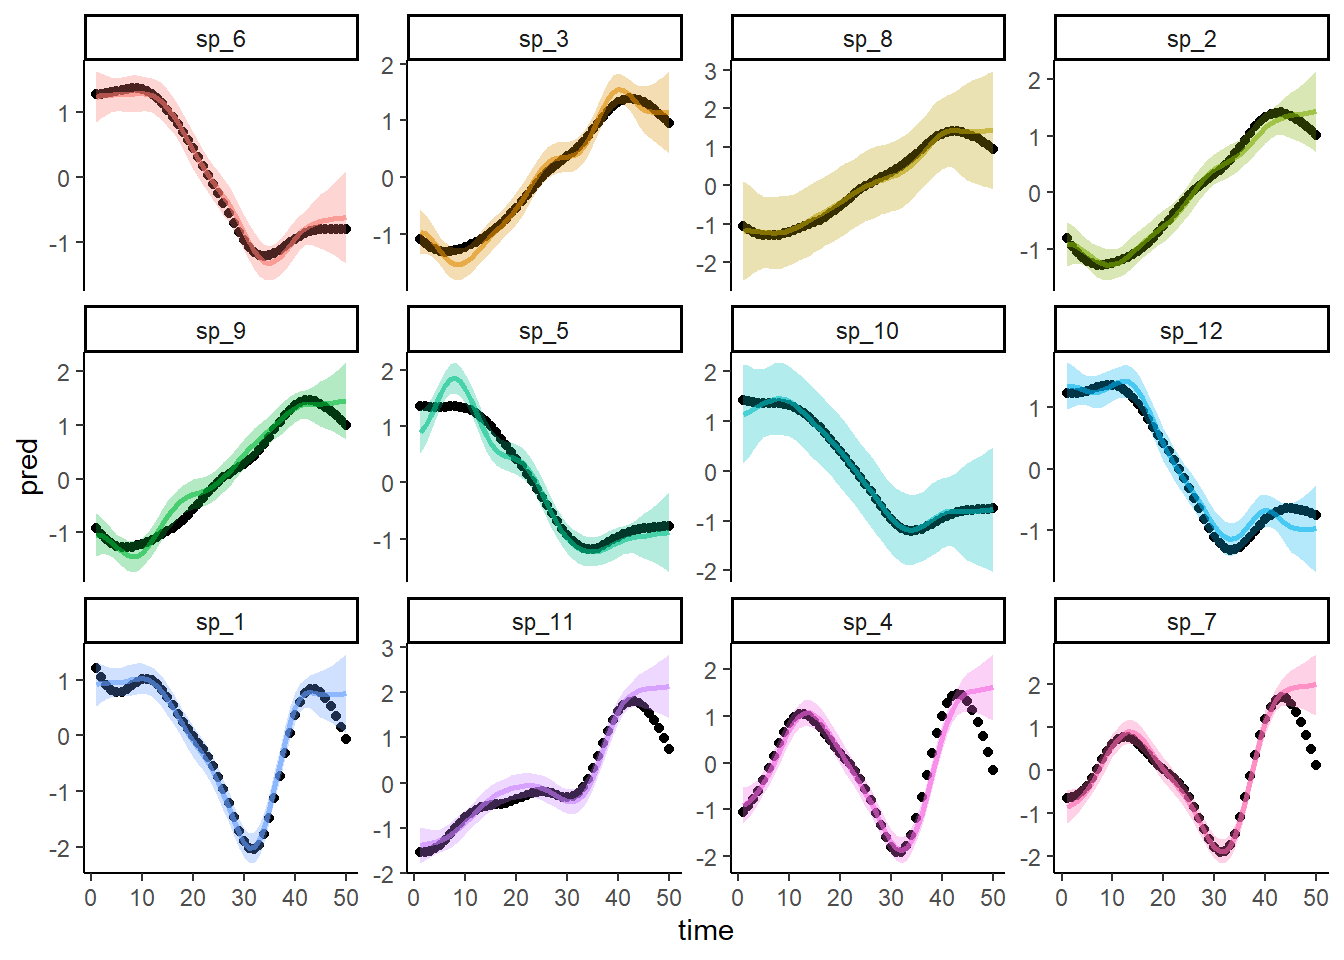 Predicting species' nonlinear time trends using Hierarchical Generalized Additive Models with phylogenetic smooths.